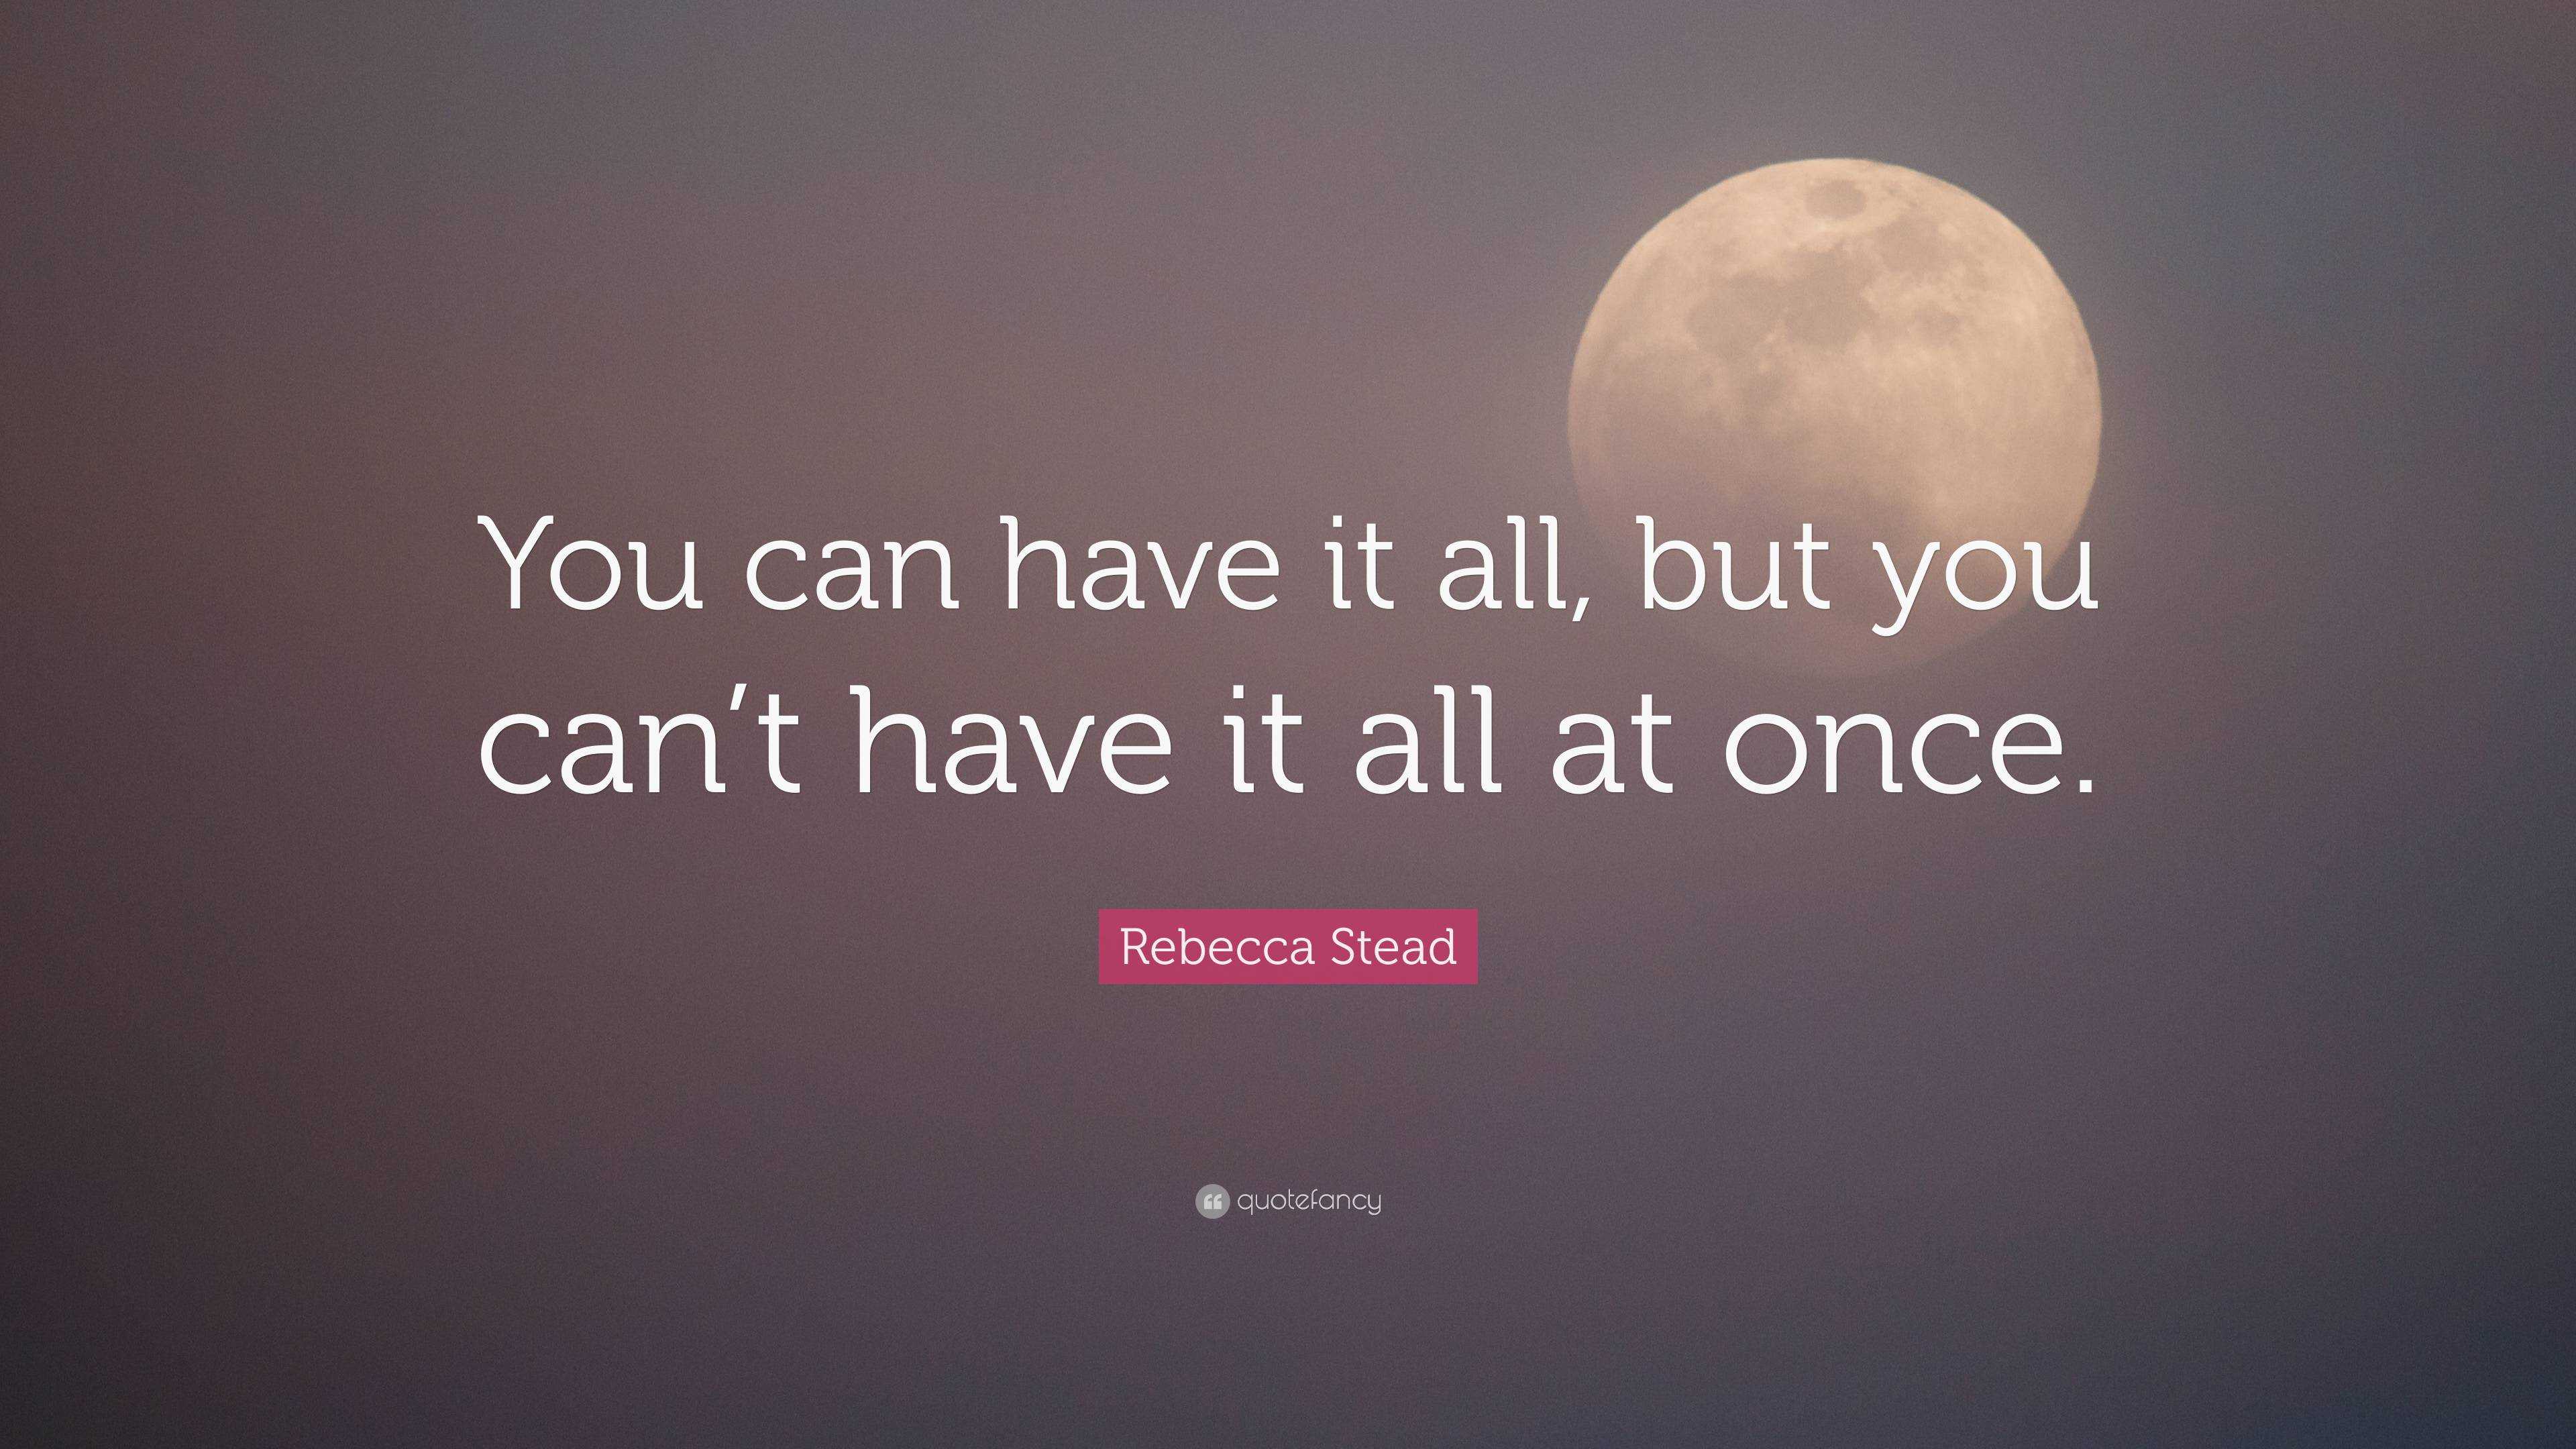 Rebecca Stead Quote: “You can have it all, but you can’t have it all at ...